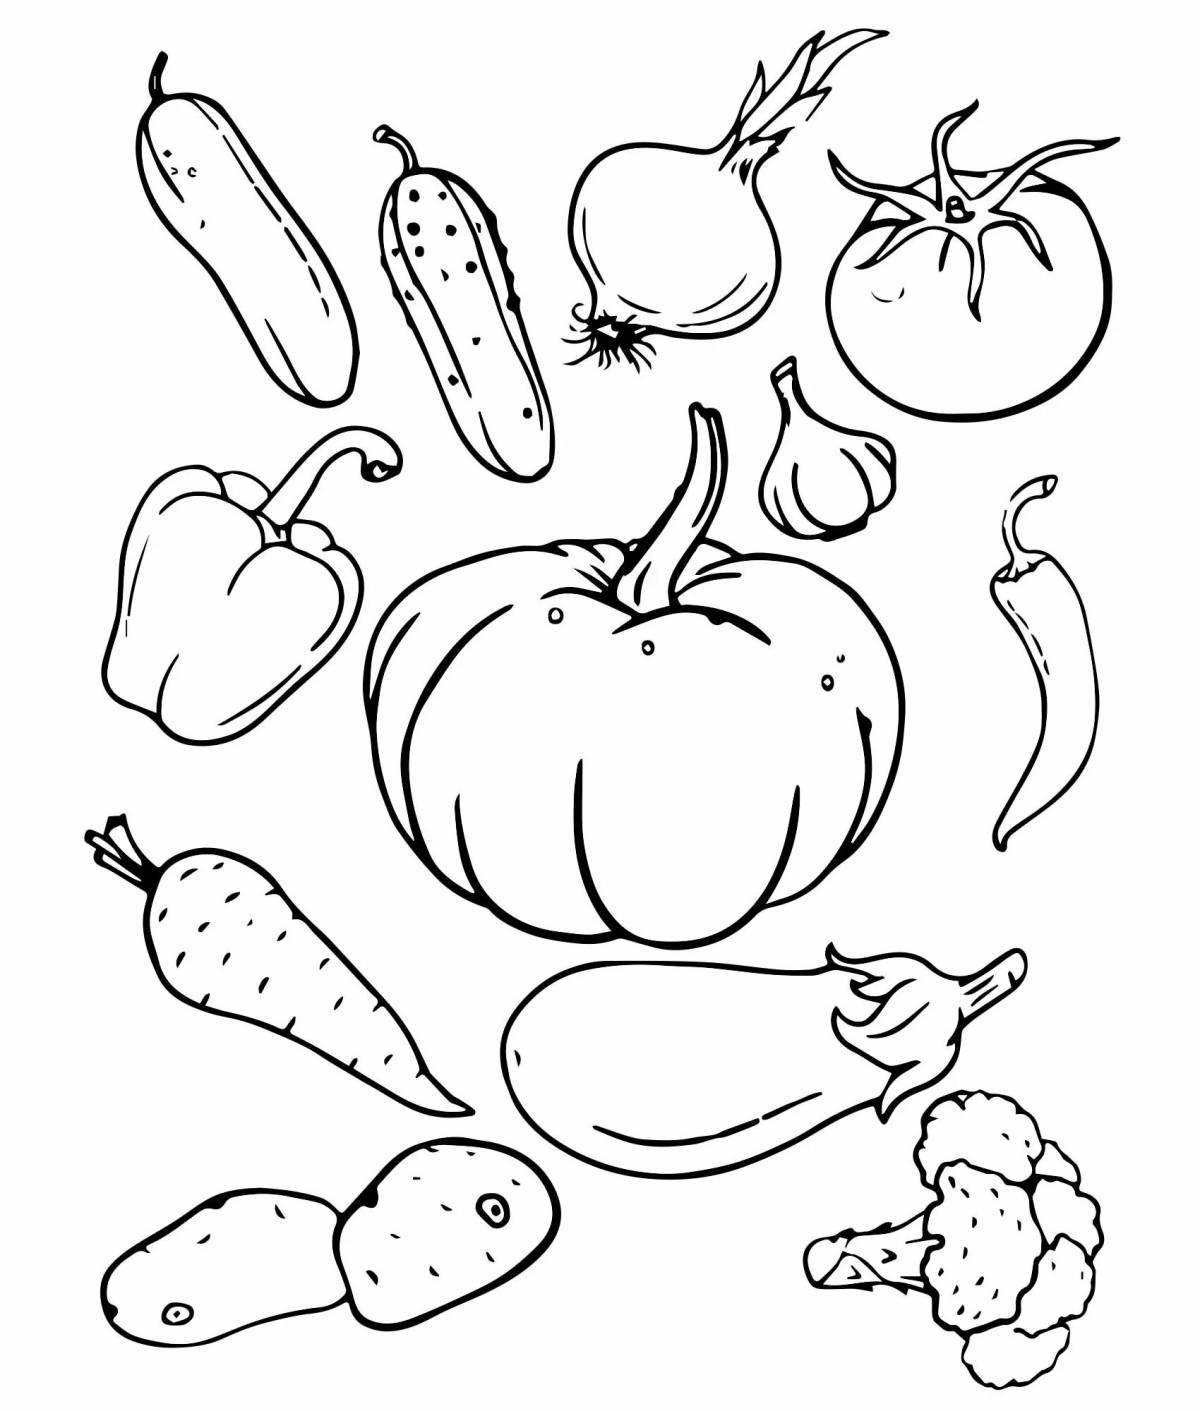 Fun coloring of vegetables for children 5-6 years old